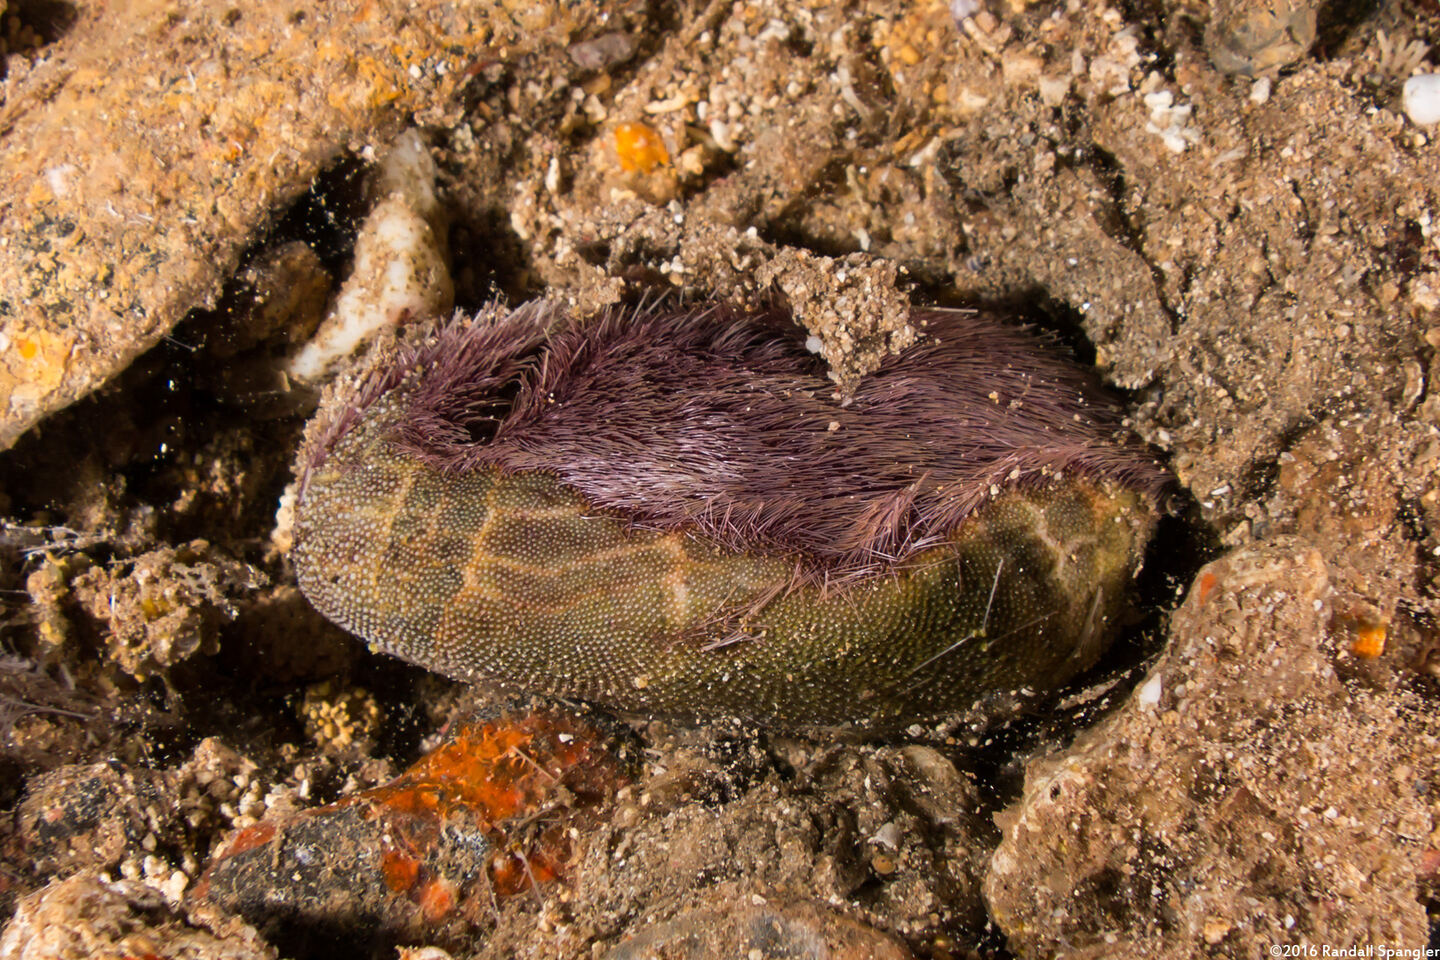 Brissus latecarinatus (Keeled Heart Urchin); Partially eaten by a horned helmet snail